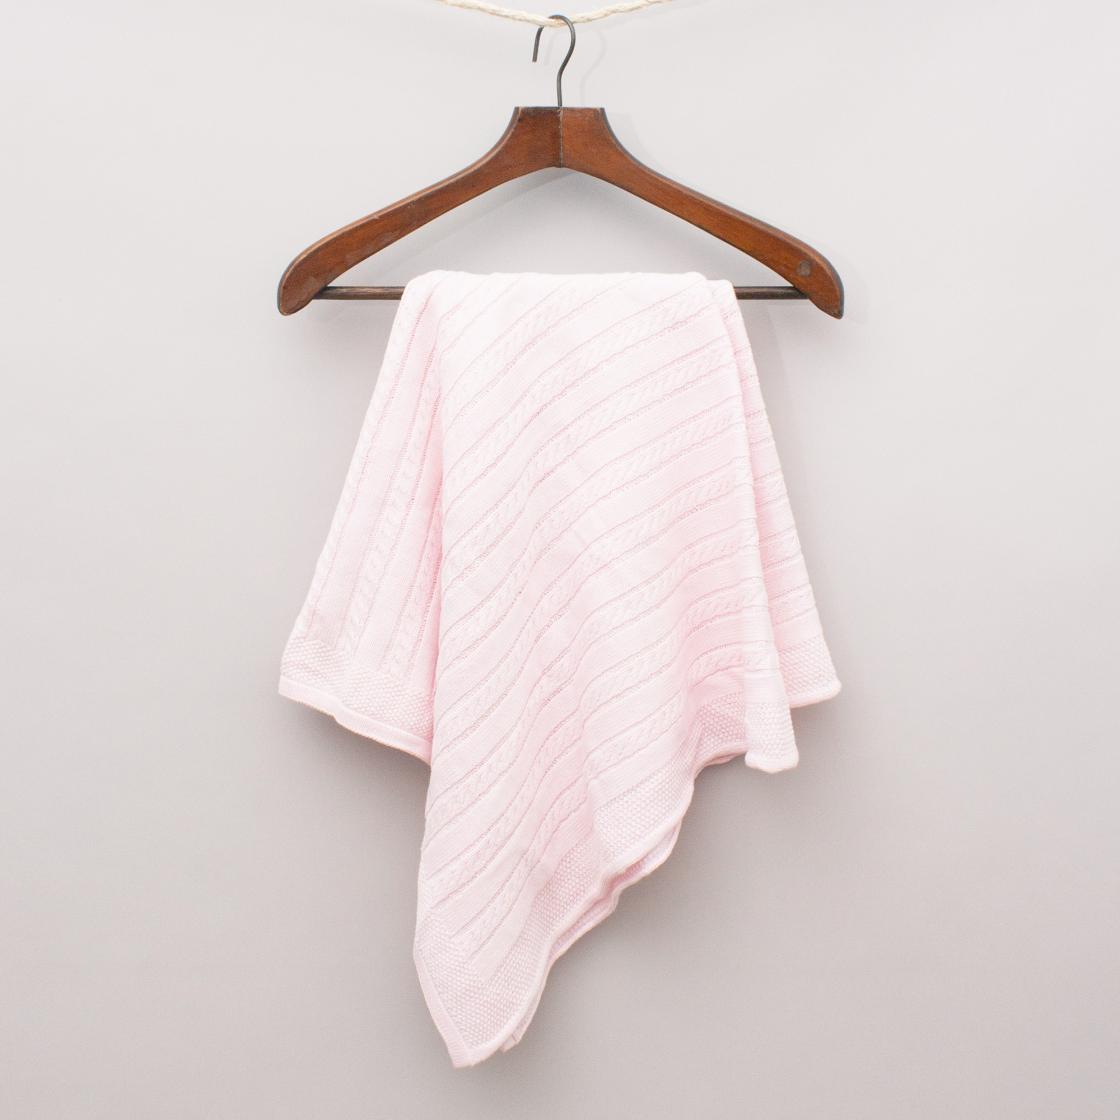 The Pink Hw Woven Blanket - Size 90 cm x 85cm